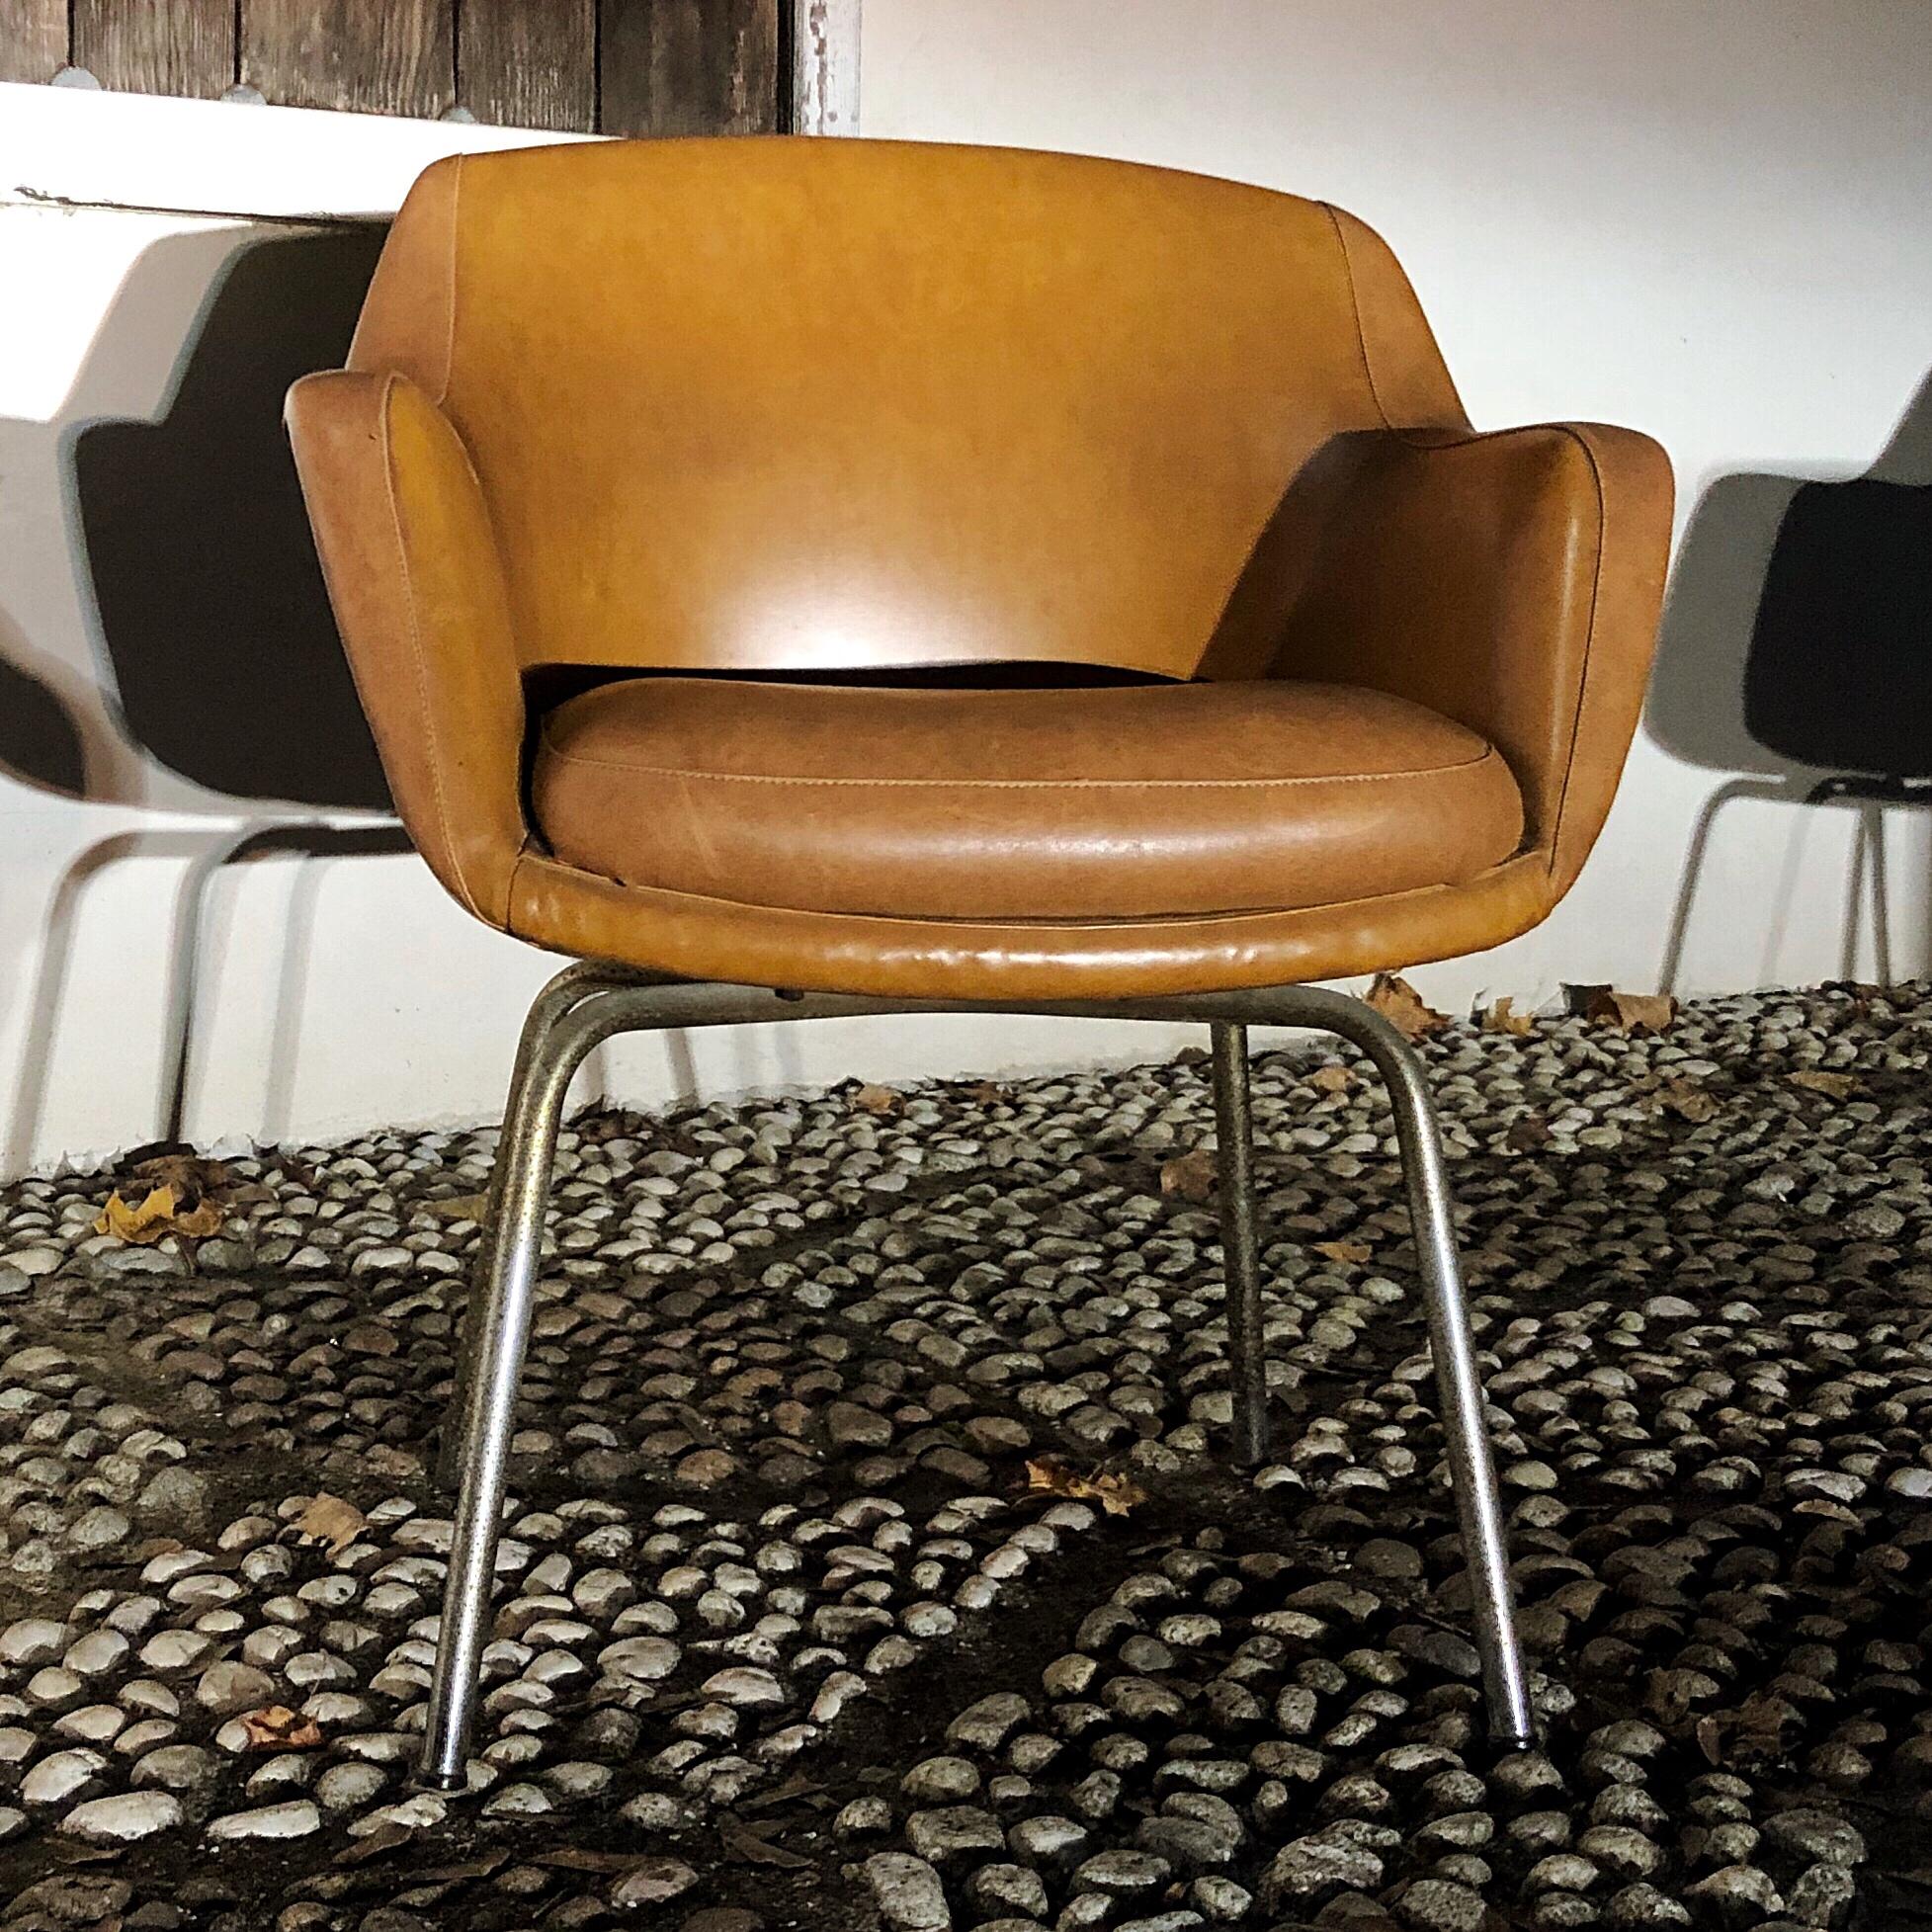 Pair of Midcentury Brown Leather Armchairs in the Style of Arne Jacobsen, 1960s For Sale 6